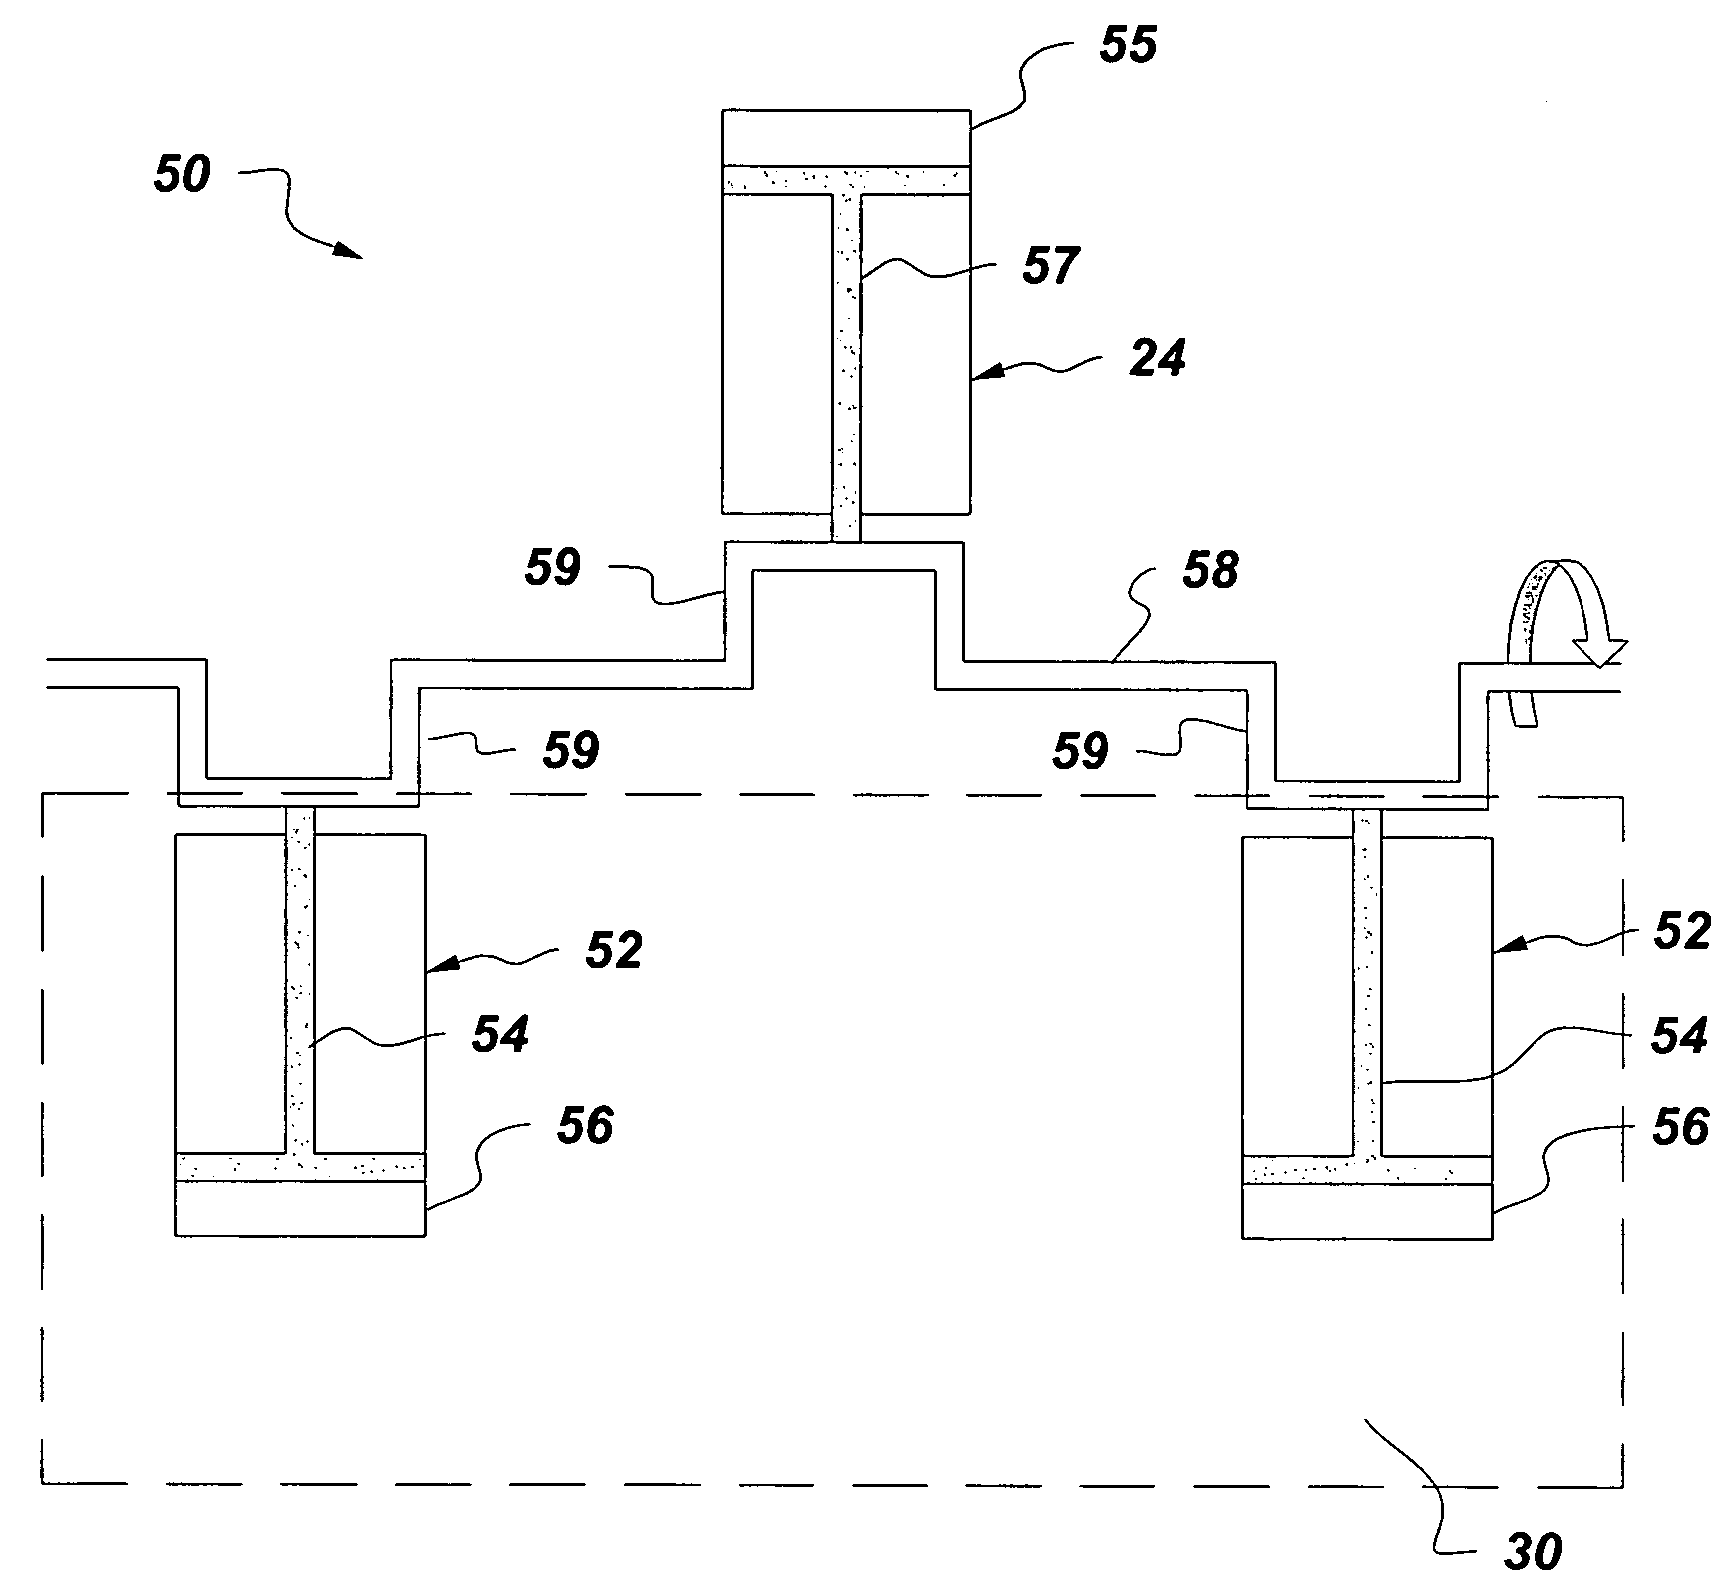 System and method for reducing emission from a combustion engine